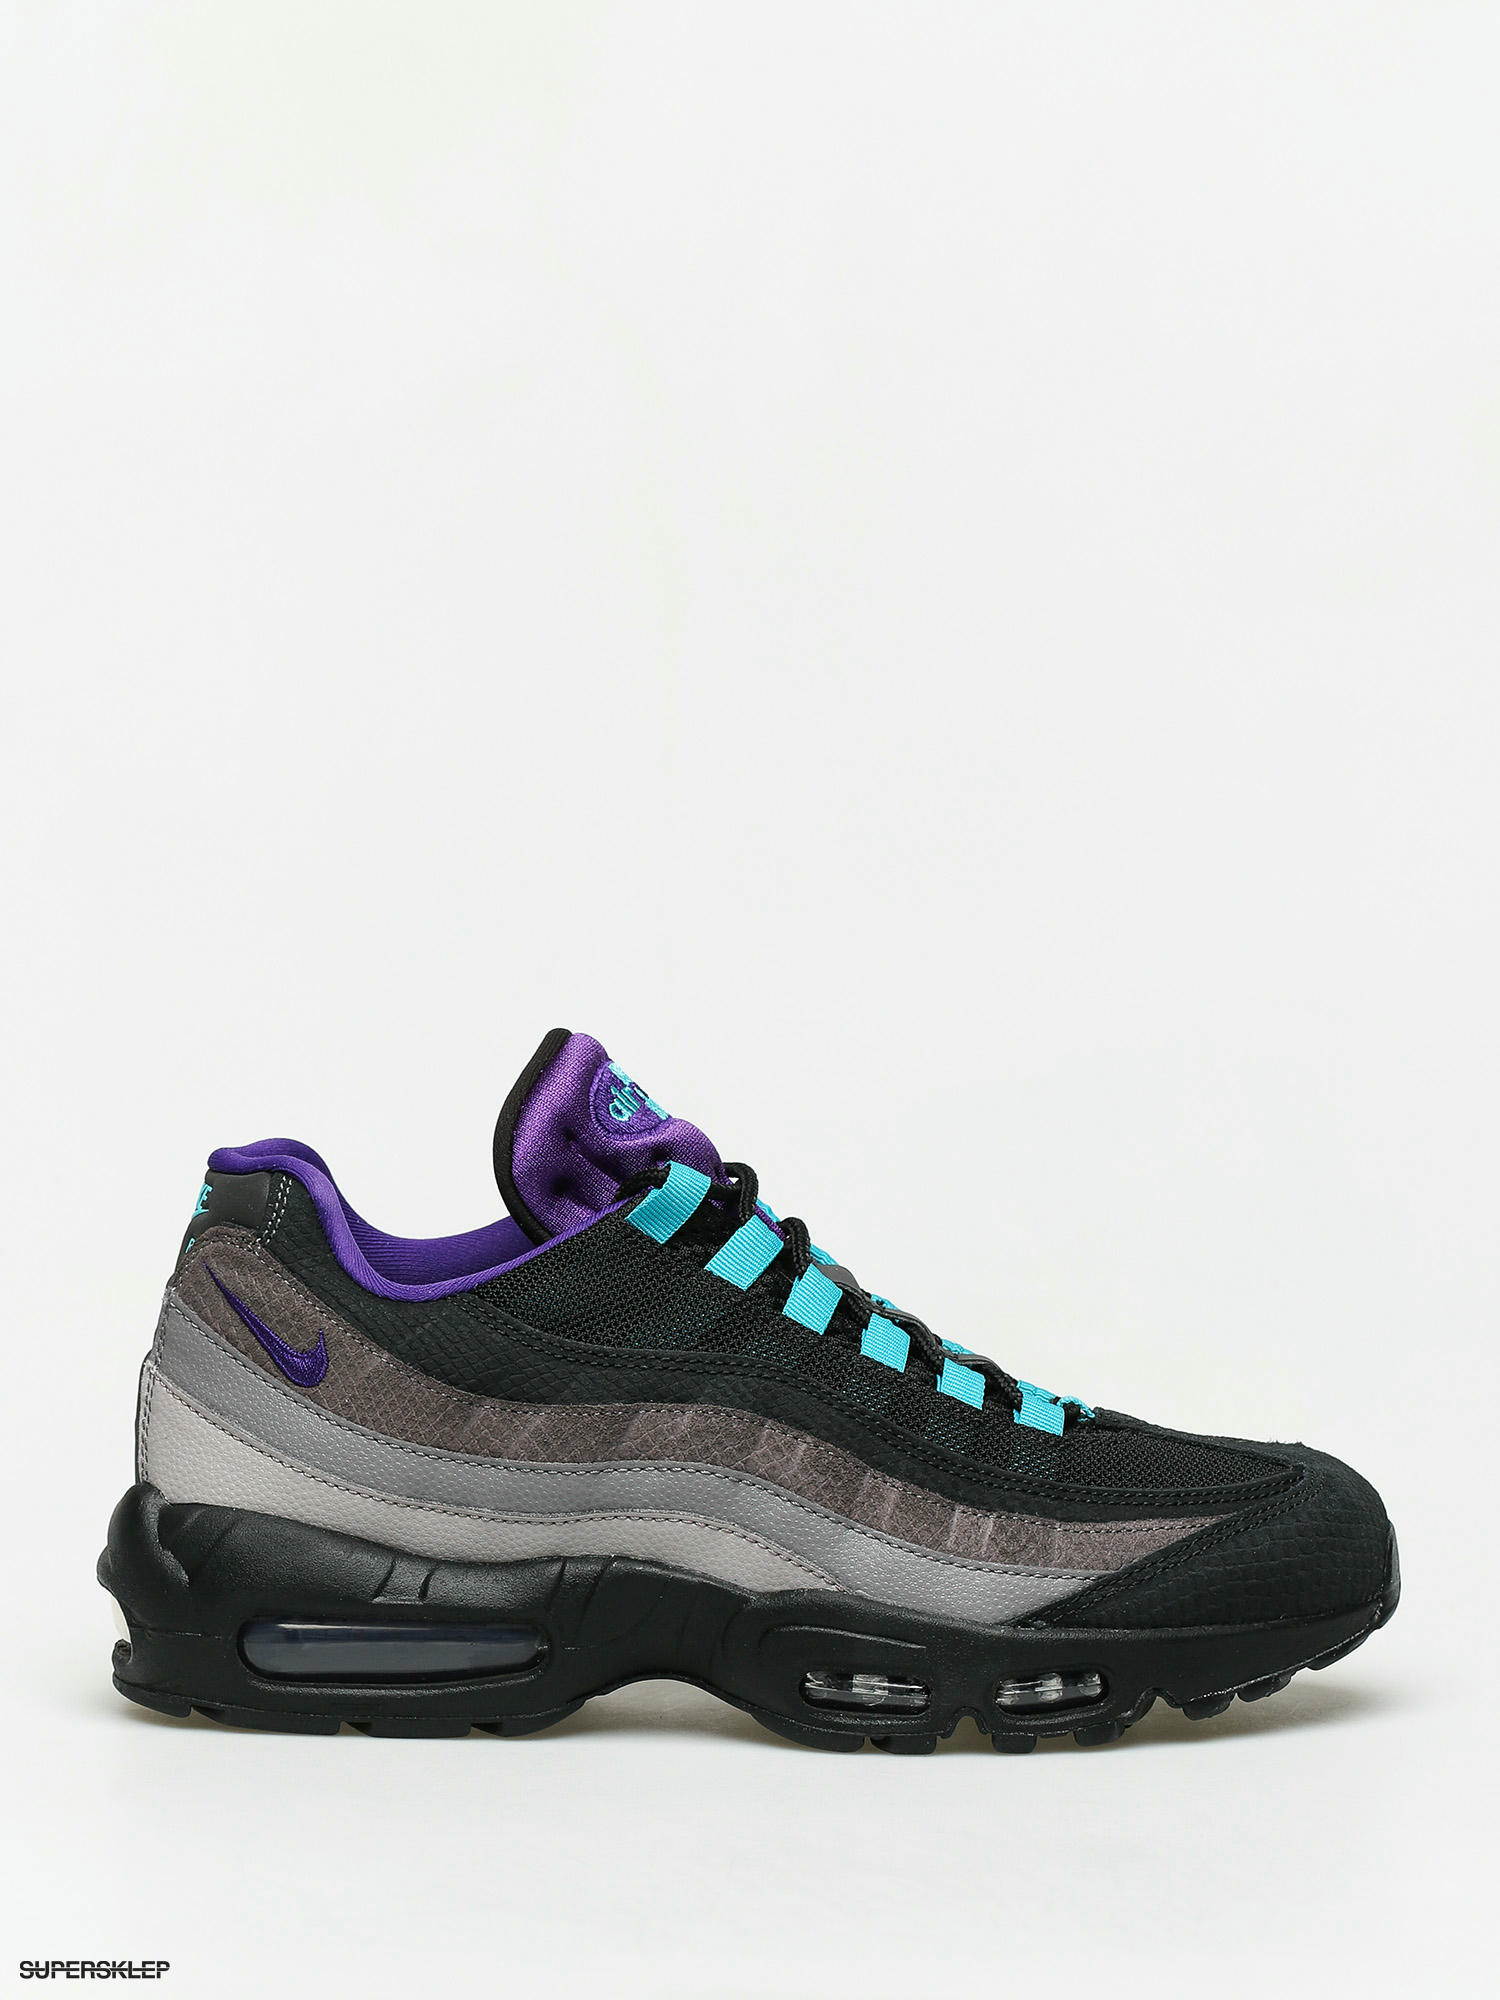 purple and turquoise air max 95